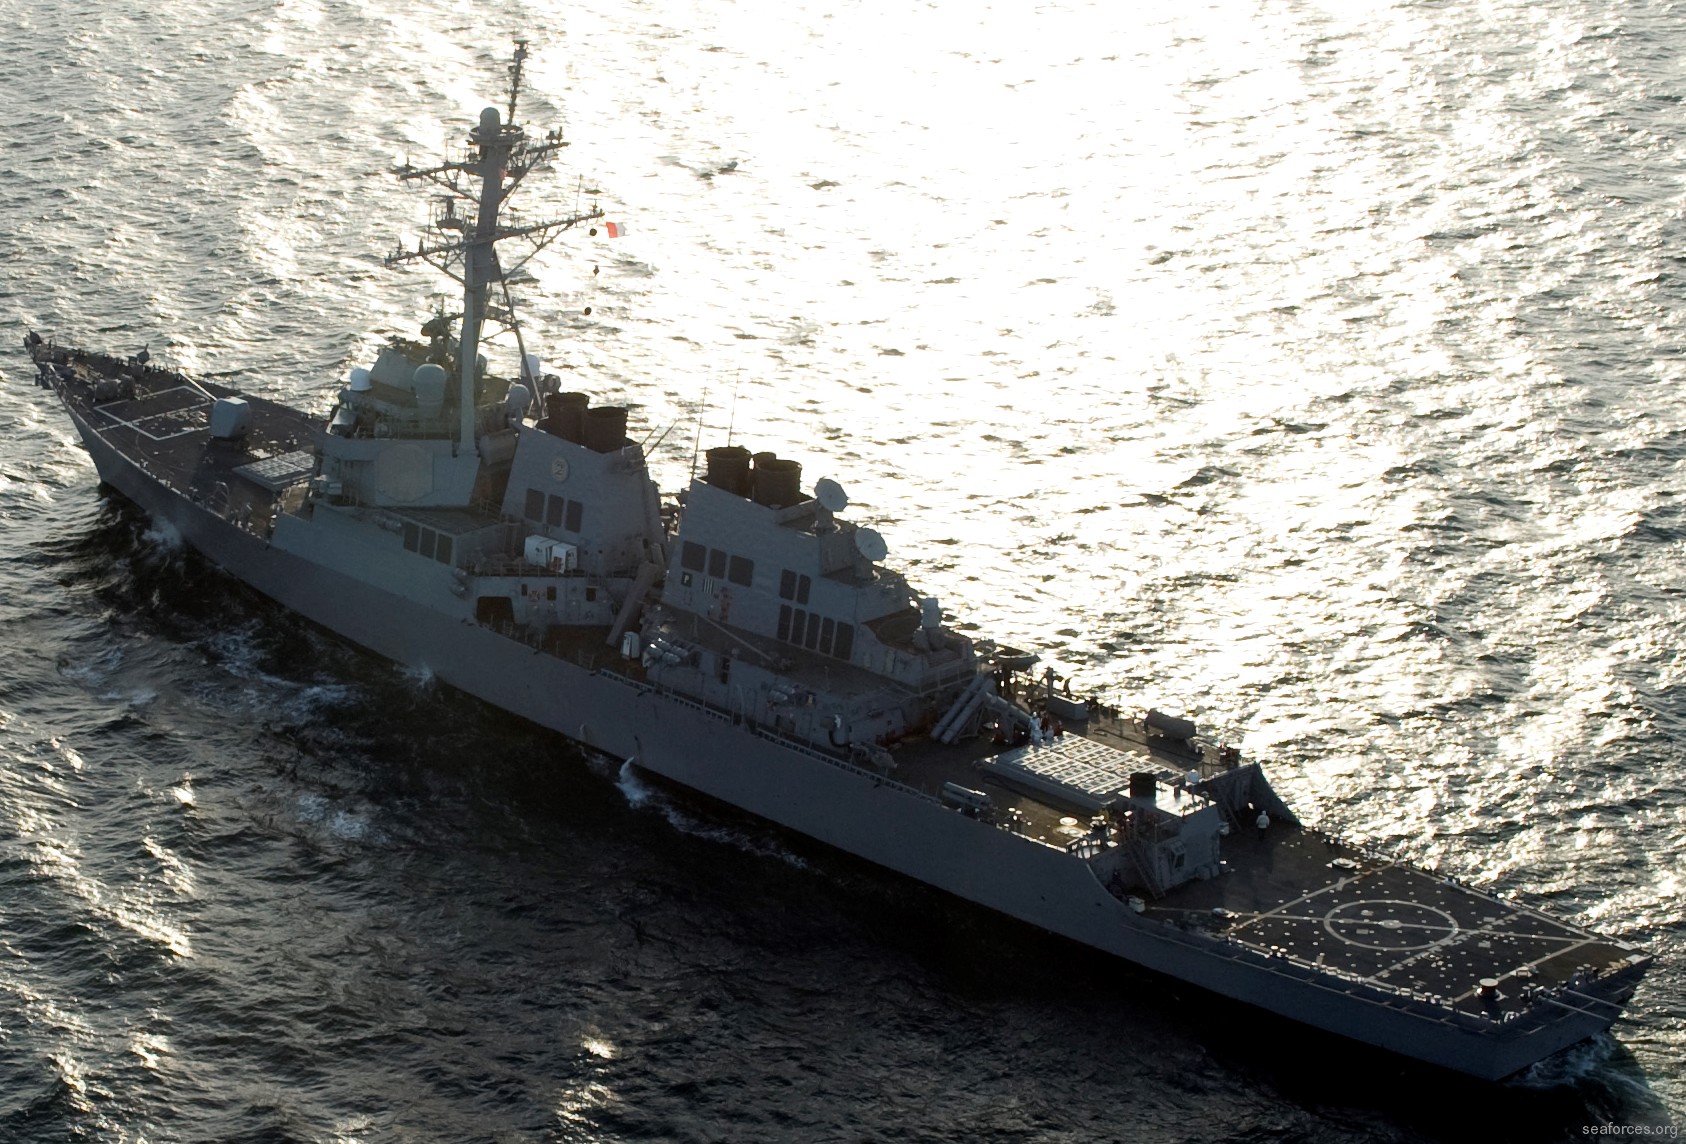 ddg-58 uss laboon guided missile destroyer us navy 55